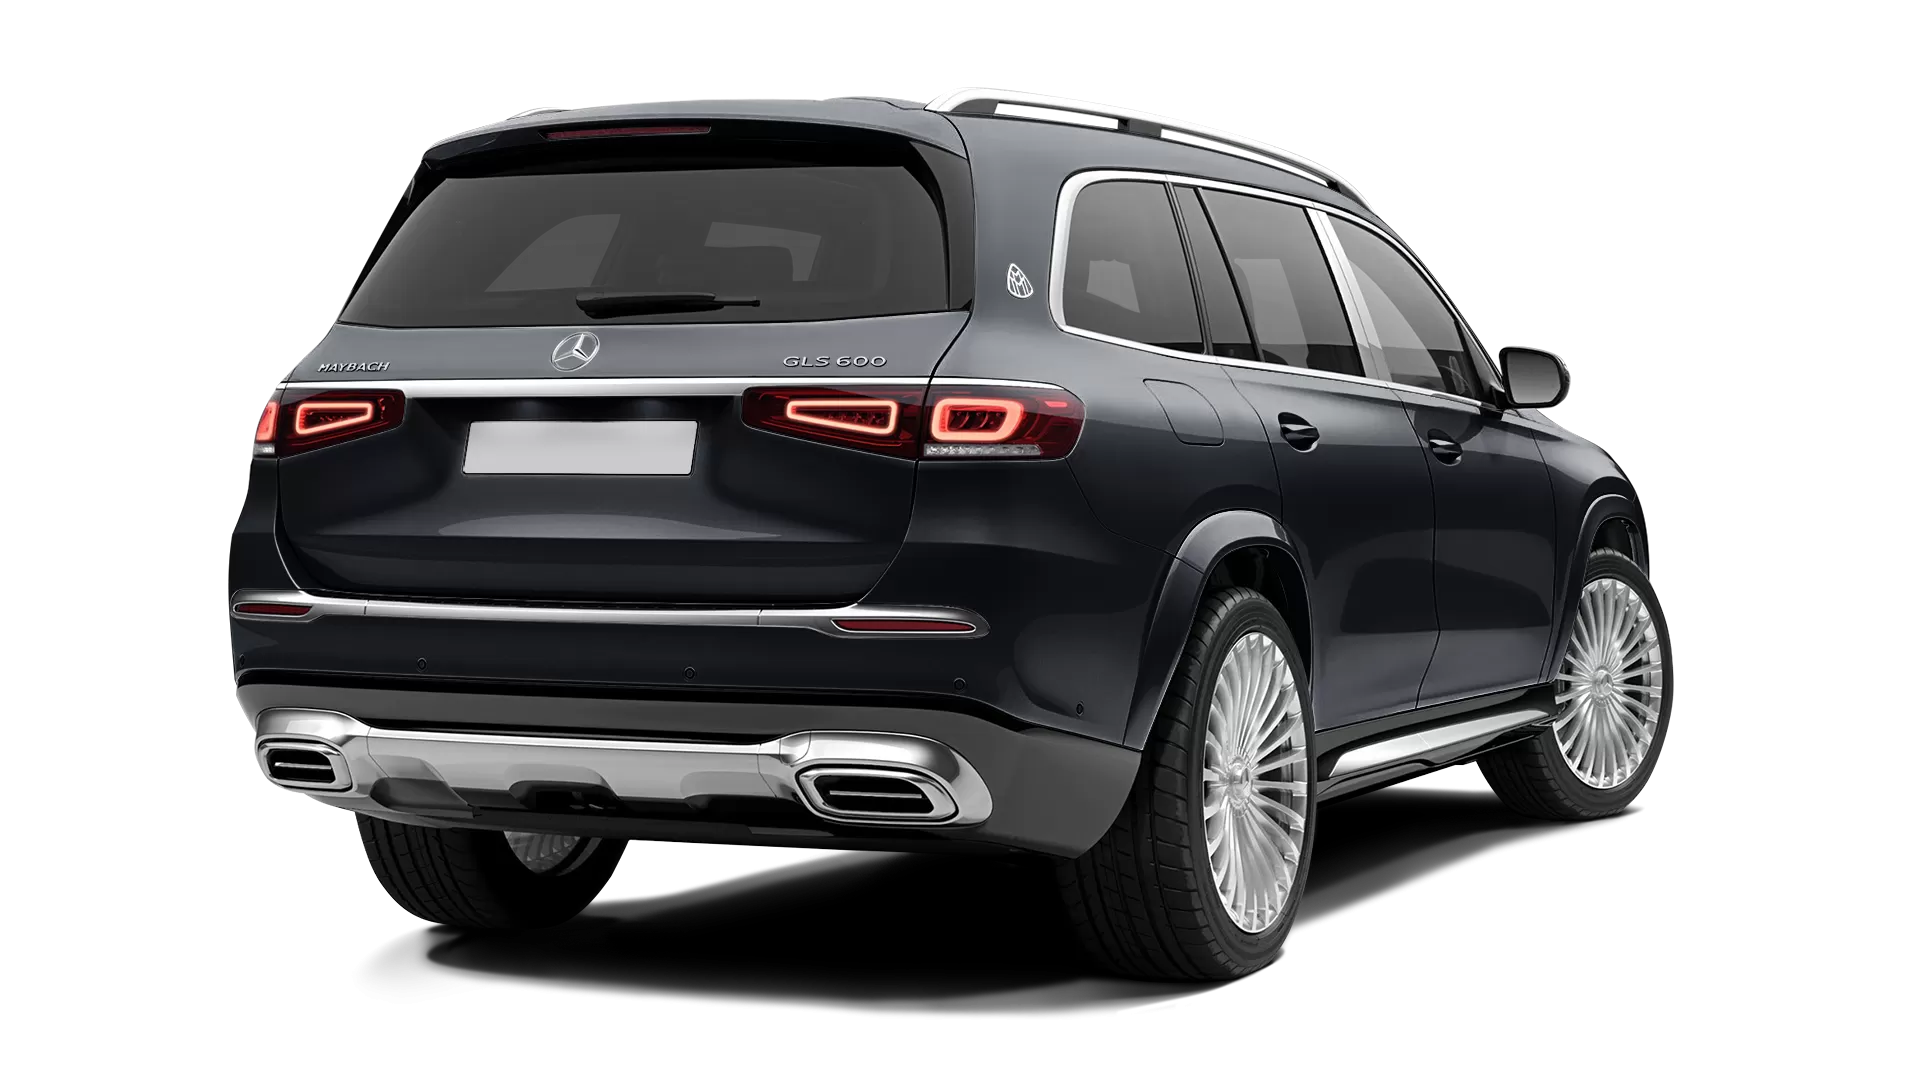 Mercedes Maybach GLS 600 stock rear view in Obsidian Black (Non Metallic) color